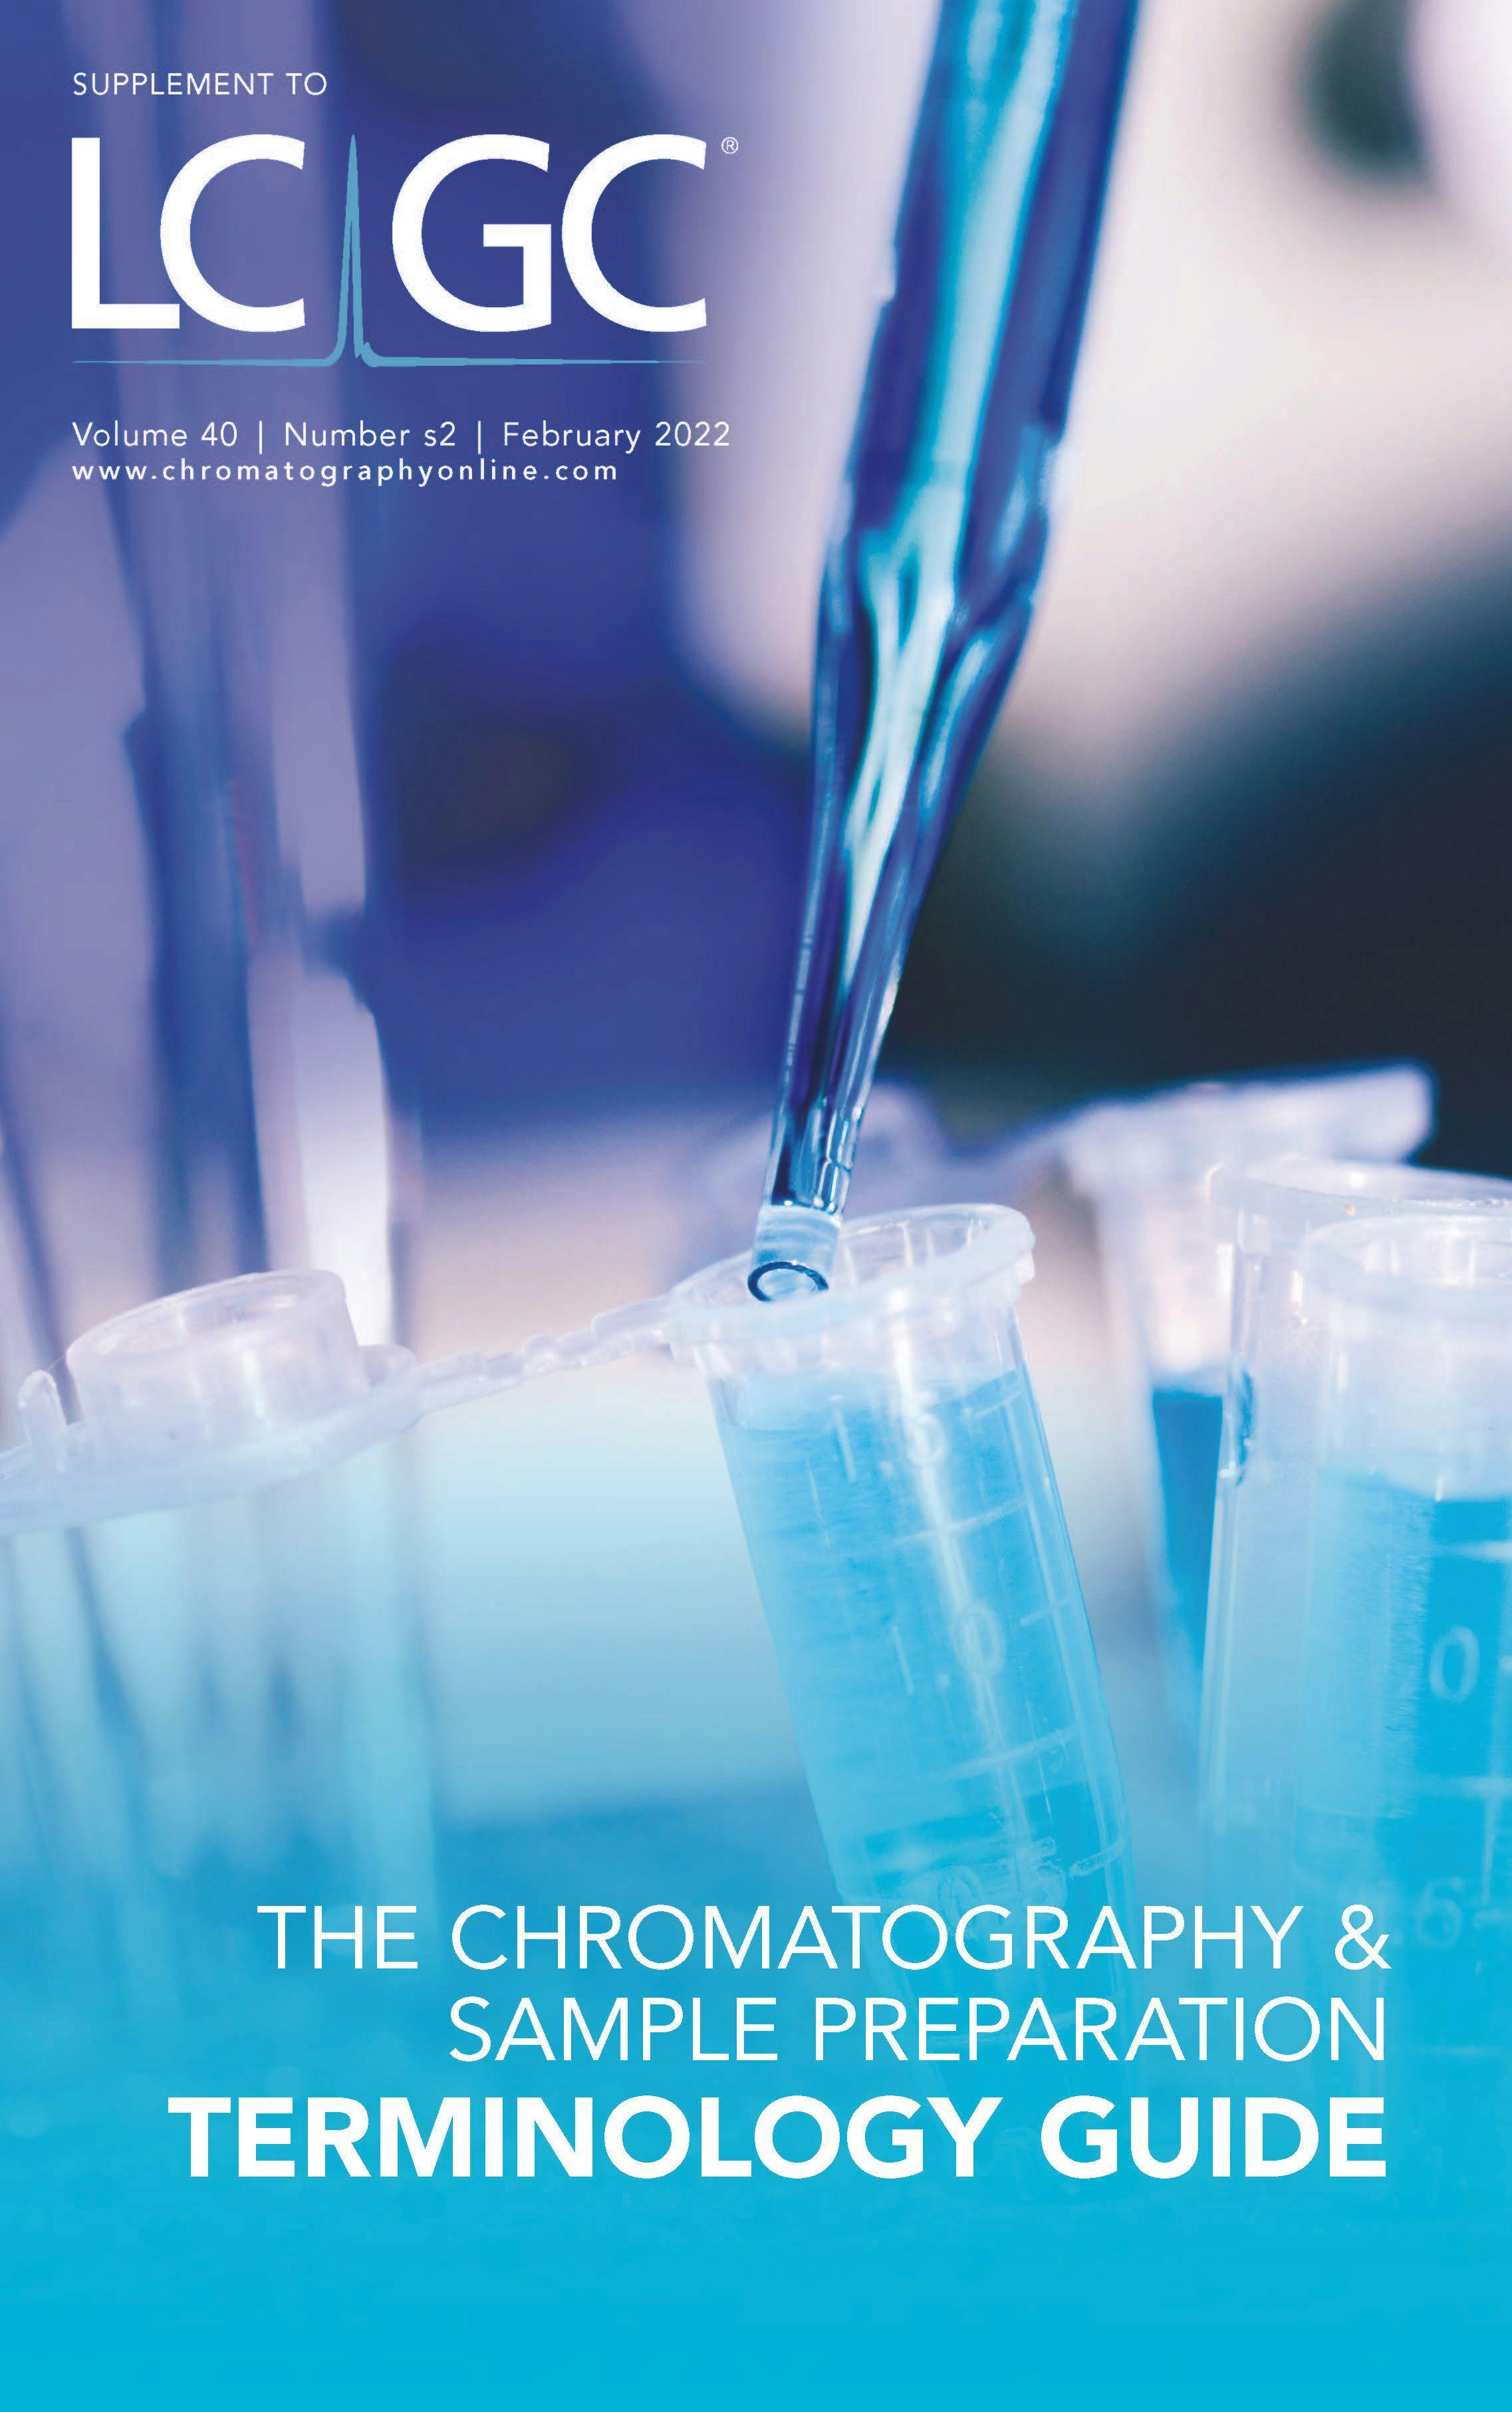 The Chromatography & Sample Preparation Terminology Guide